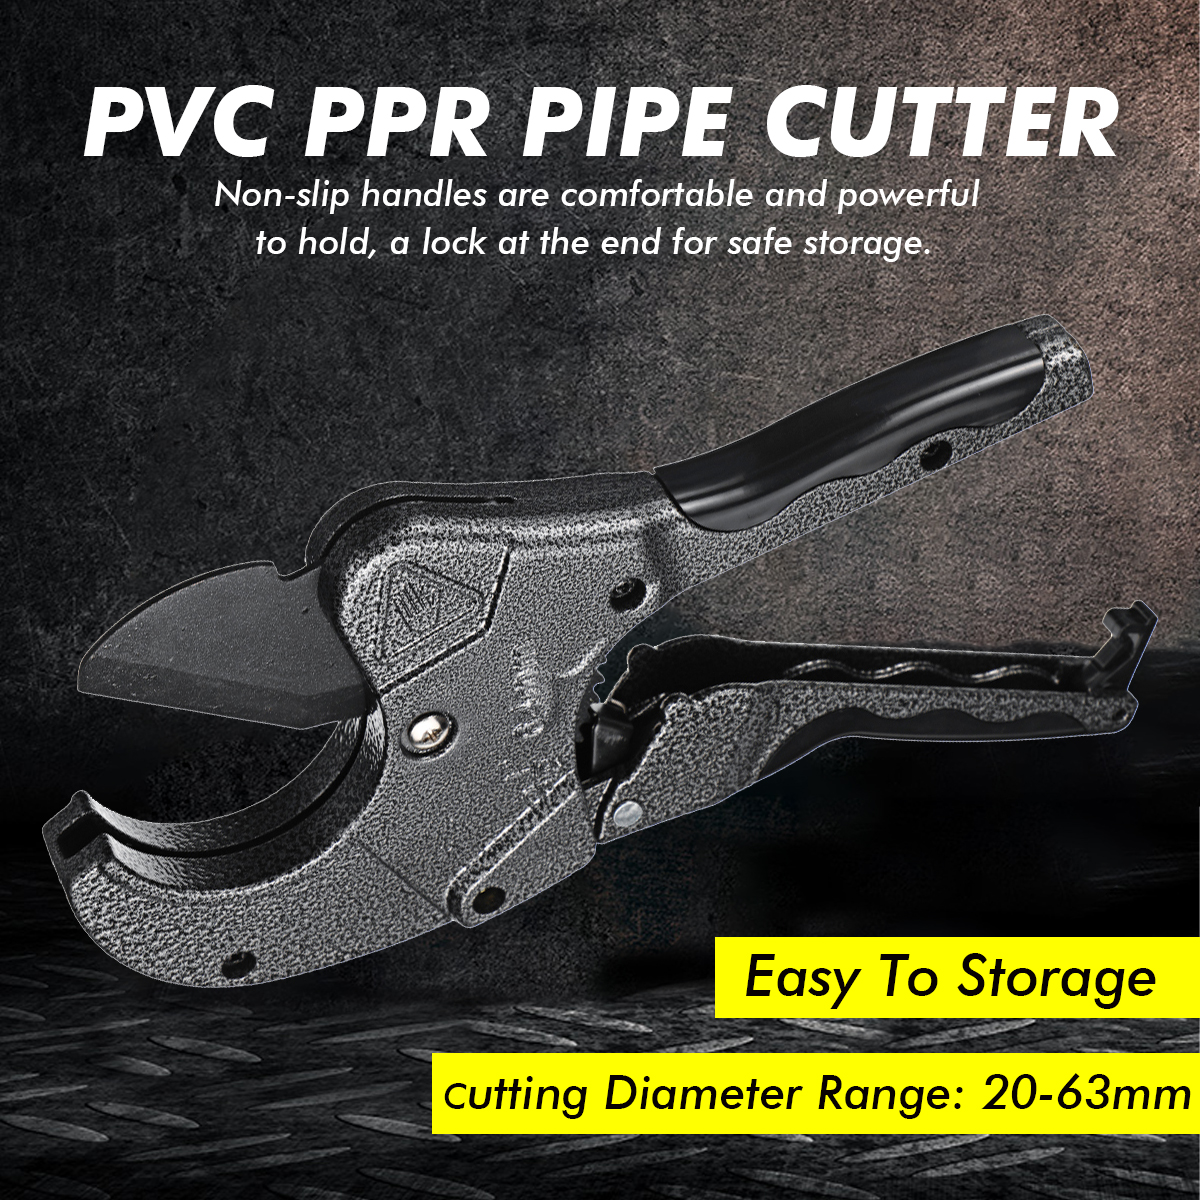 Aluminum-Alloy-Portable-PVC-PPR-Pipe-Cutter-Hose-Ratchet-Action-Up-To-63mm-Tube-1869999-4